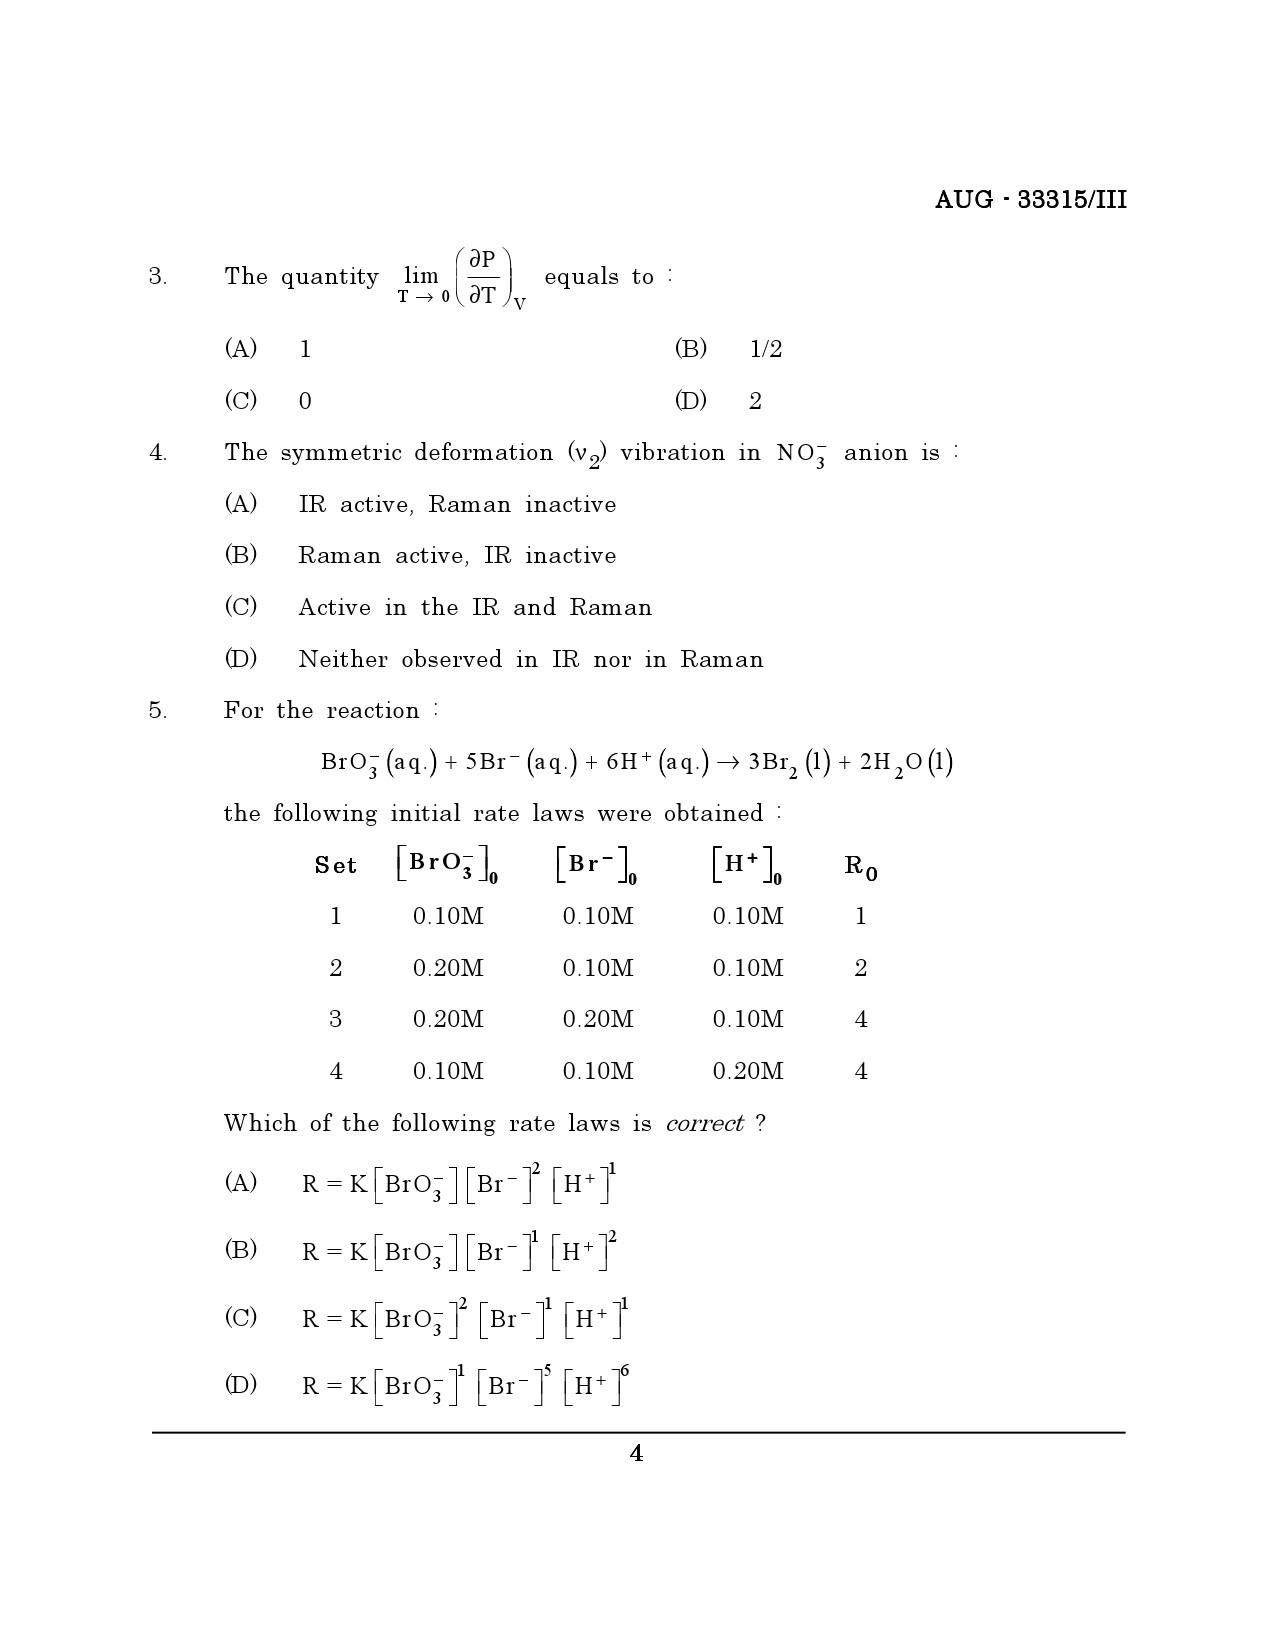 Maharashtra SET Chemical Sciences Question Paper III August 2015 3